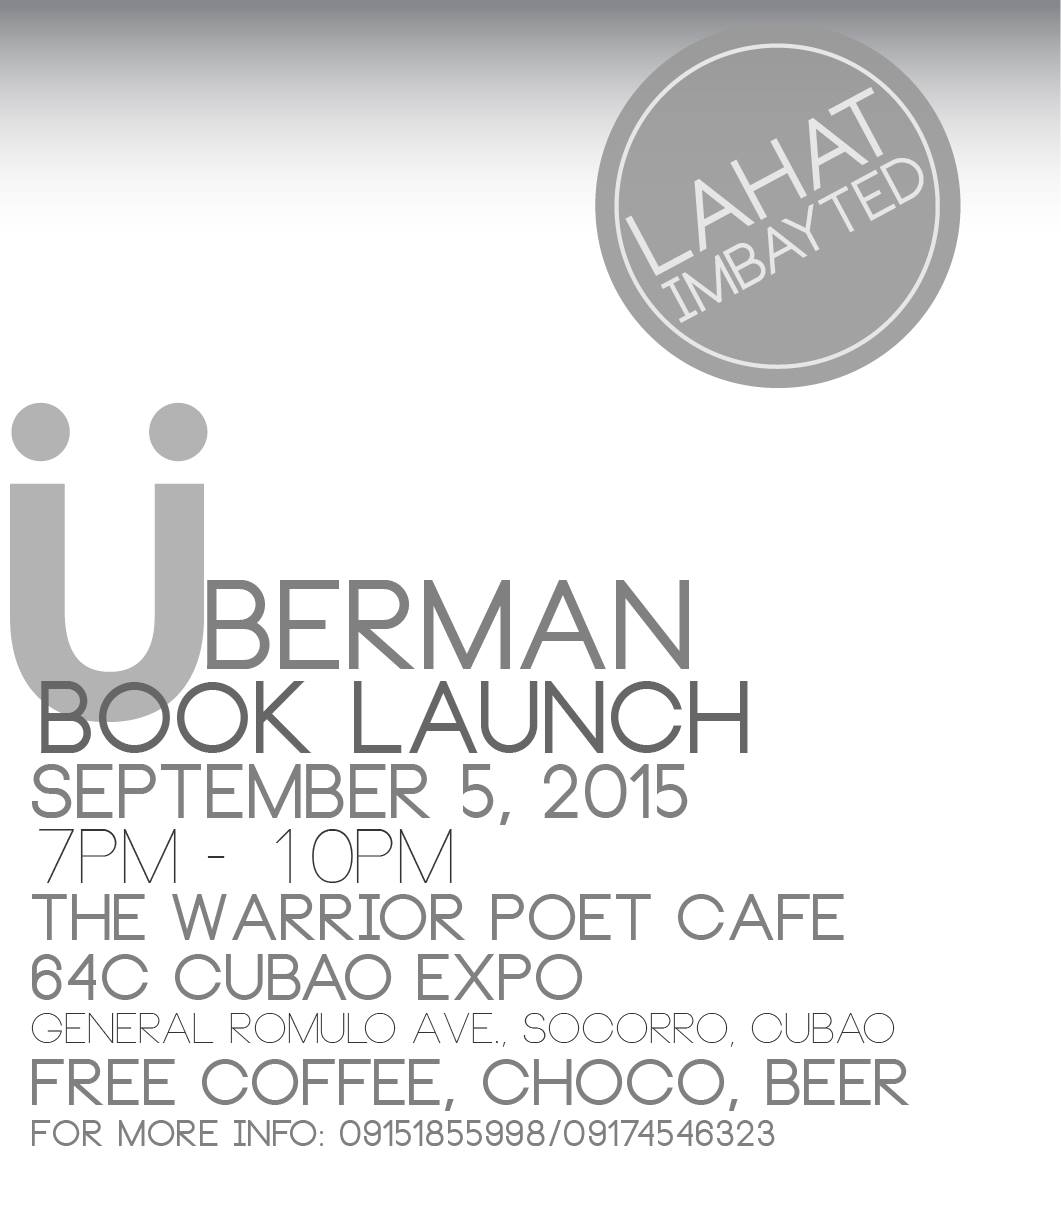 Überman Finally! Saturday, September 5 at 7:00pm The Warrior Poet Art Cafe 64C Cubao Expo, General Romulo Ave., Socorro, Cubao, 1109 Quezon City, Philippines